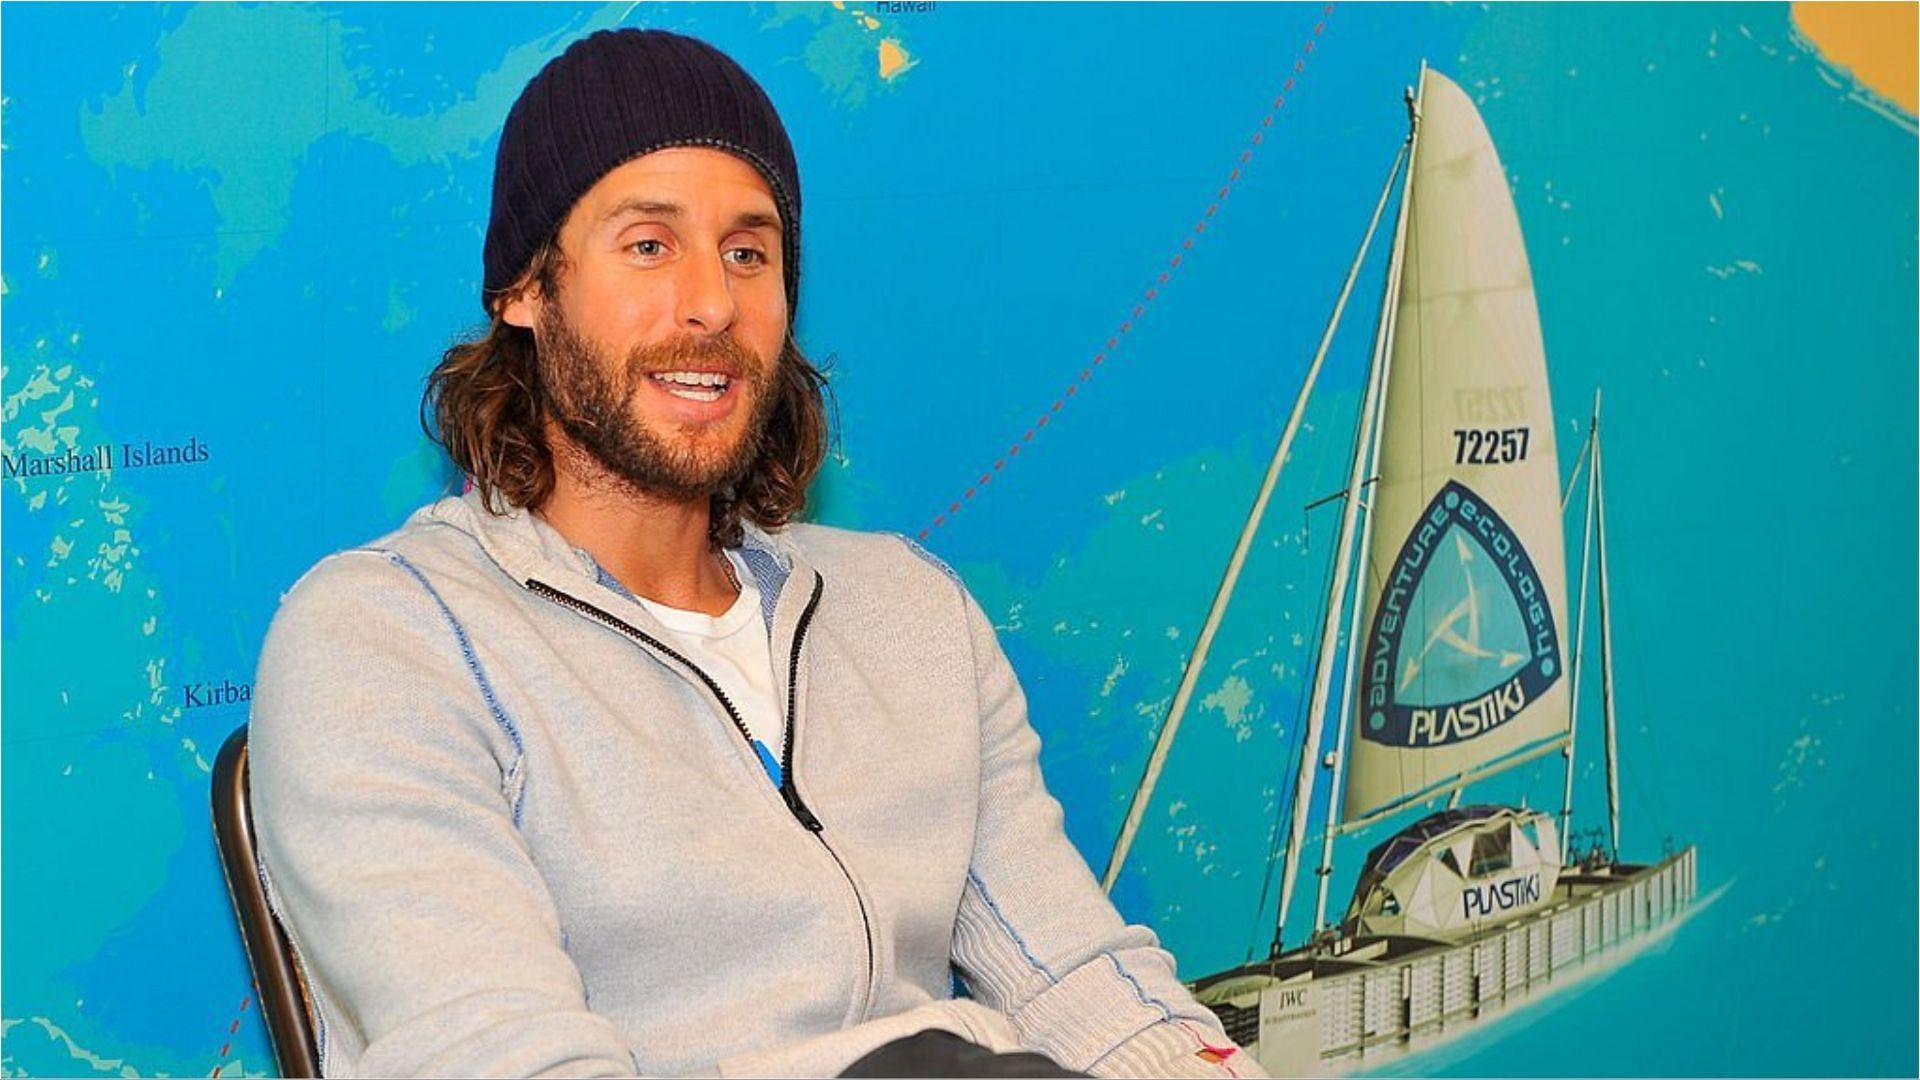 David Mayer de Rothschild has earned a lot from his career as a founder of different organizations (Image via Steve Jennings/Getty Images)